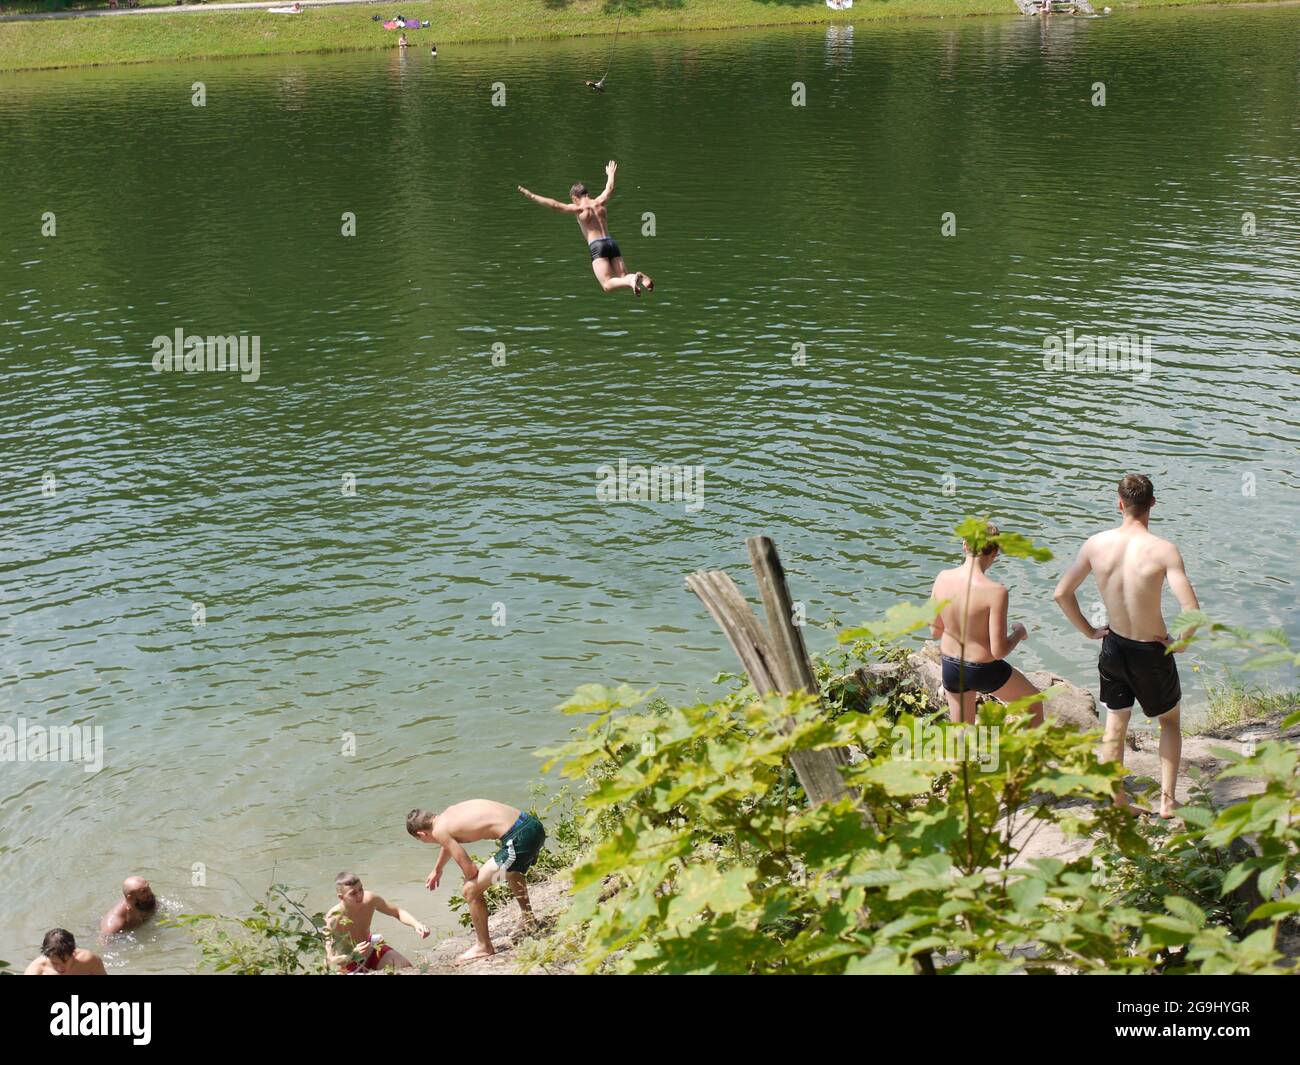 A man flying while swimming in one of the lakes in Kiev, Ukraine Stock Photo